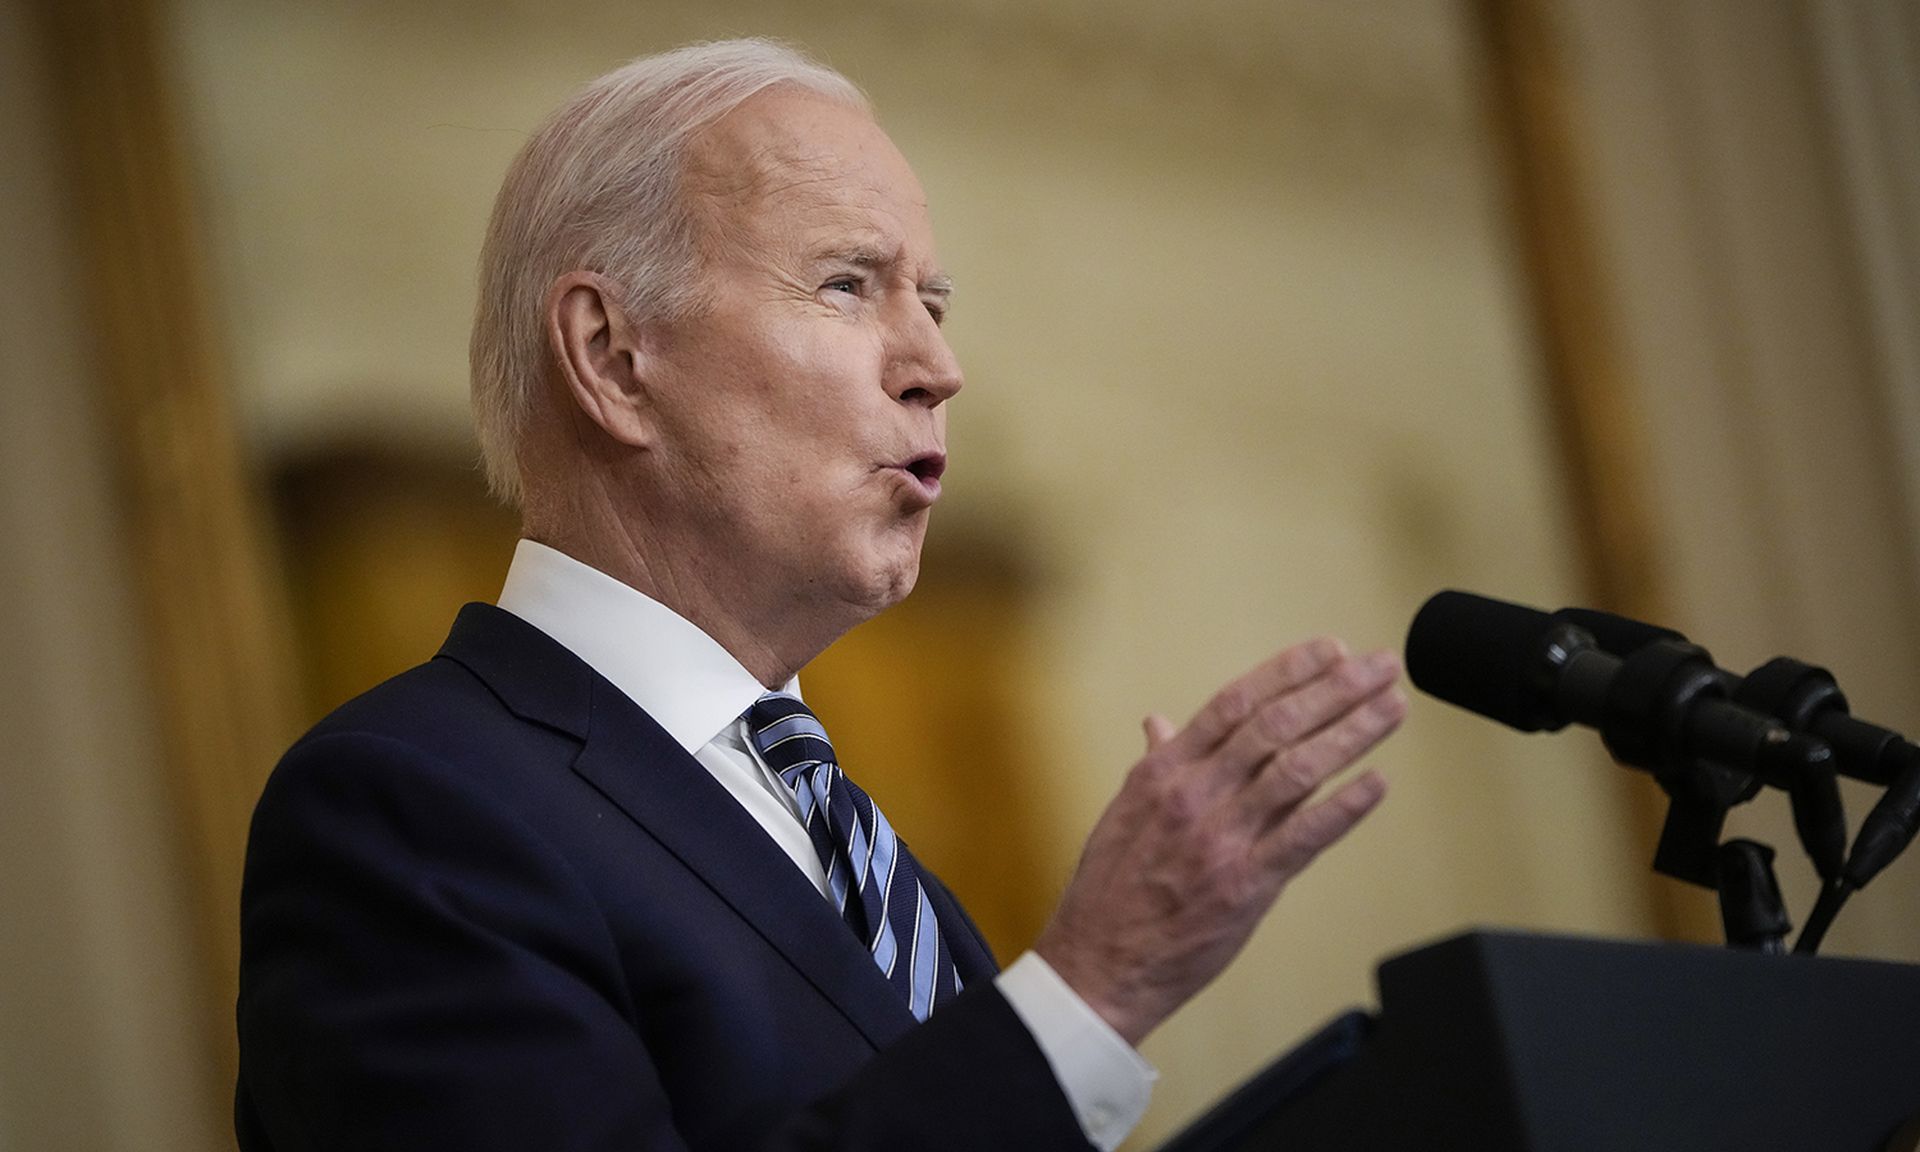 President Joe Biden delivers remarks about Russia&#8217;s &#8220;unprovoked and unjustified&#8221; military invasion of neighboring Ukraine in the East Room of the White House on Feb. 24, 2022, in Washington. (Photo by Drew Angerer/Getty Images)